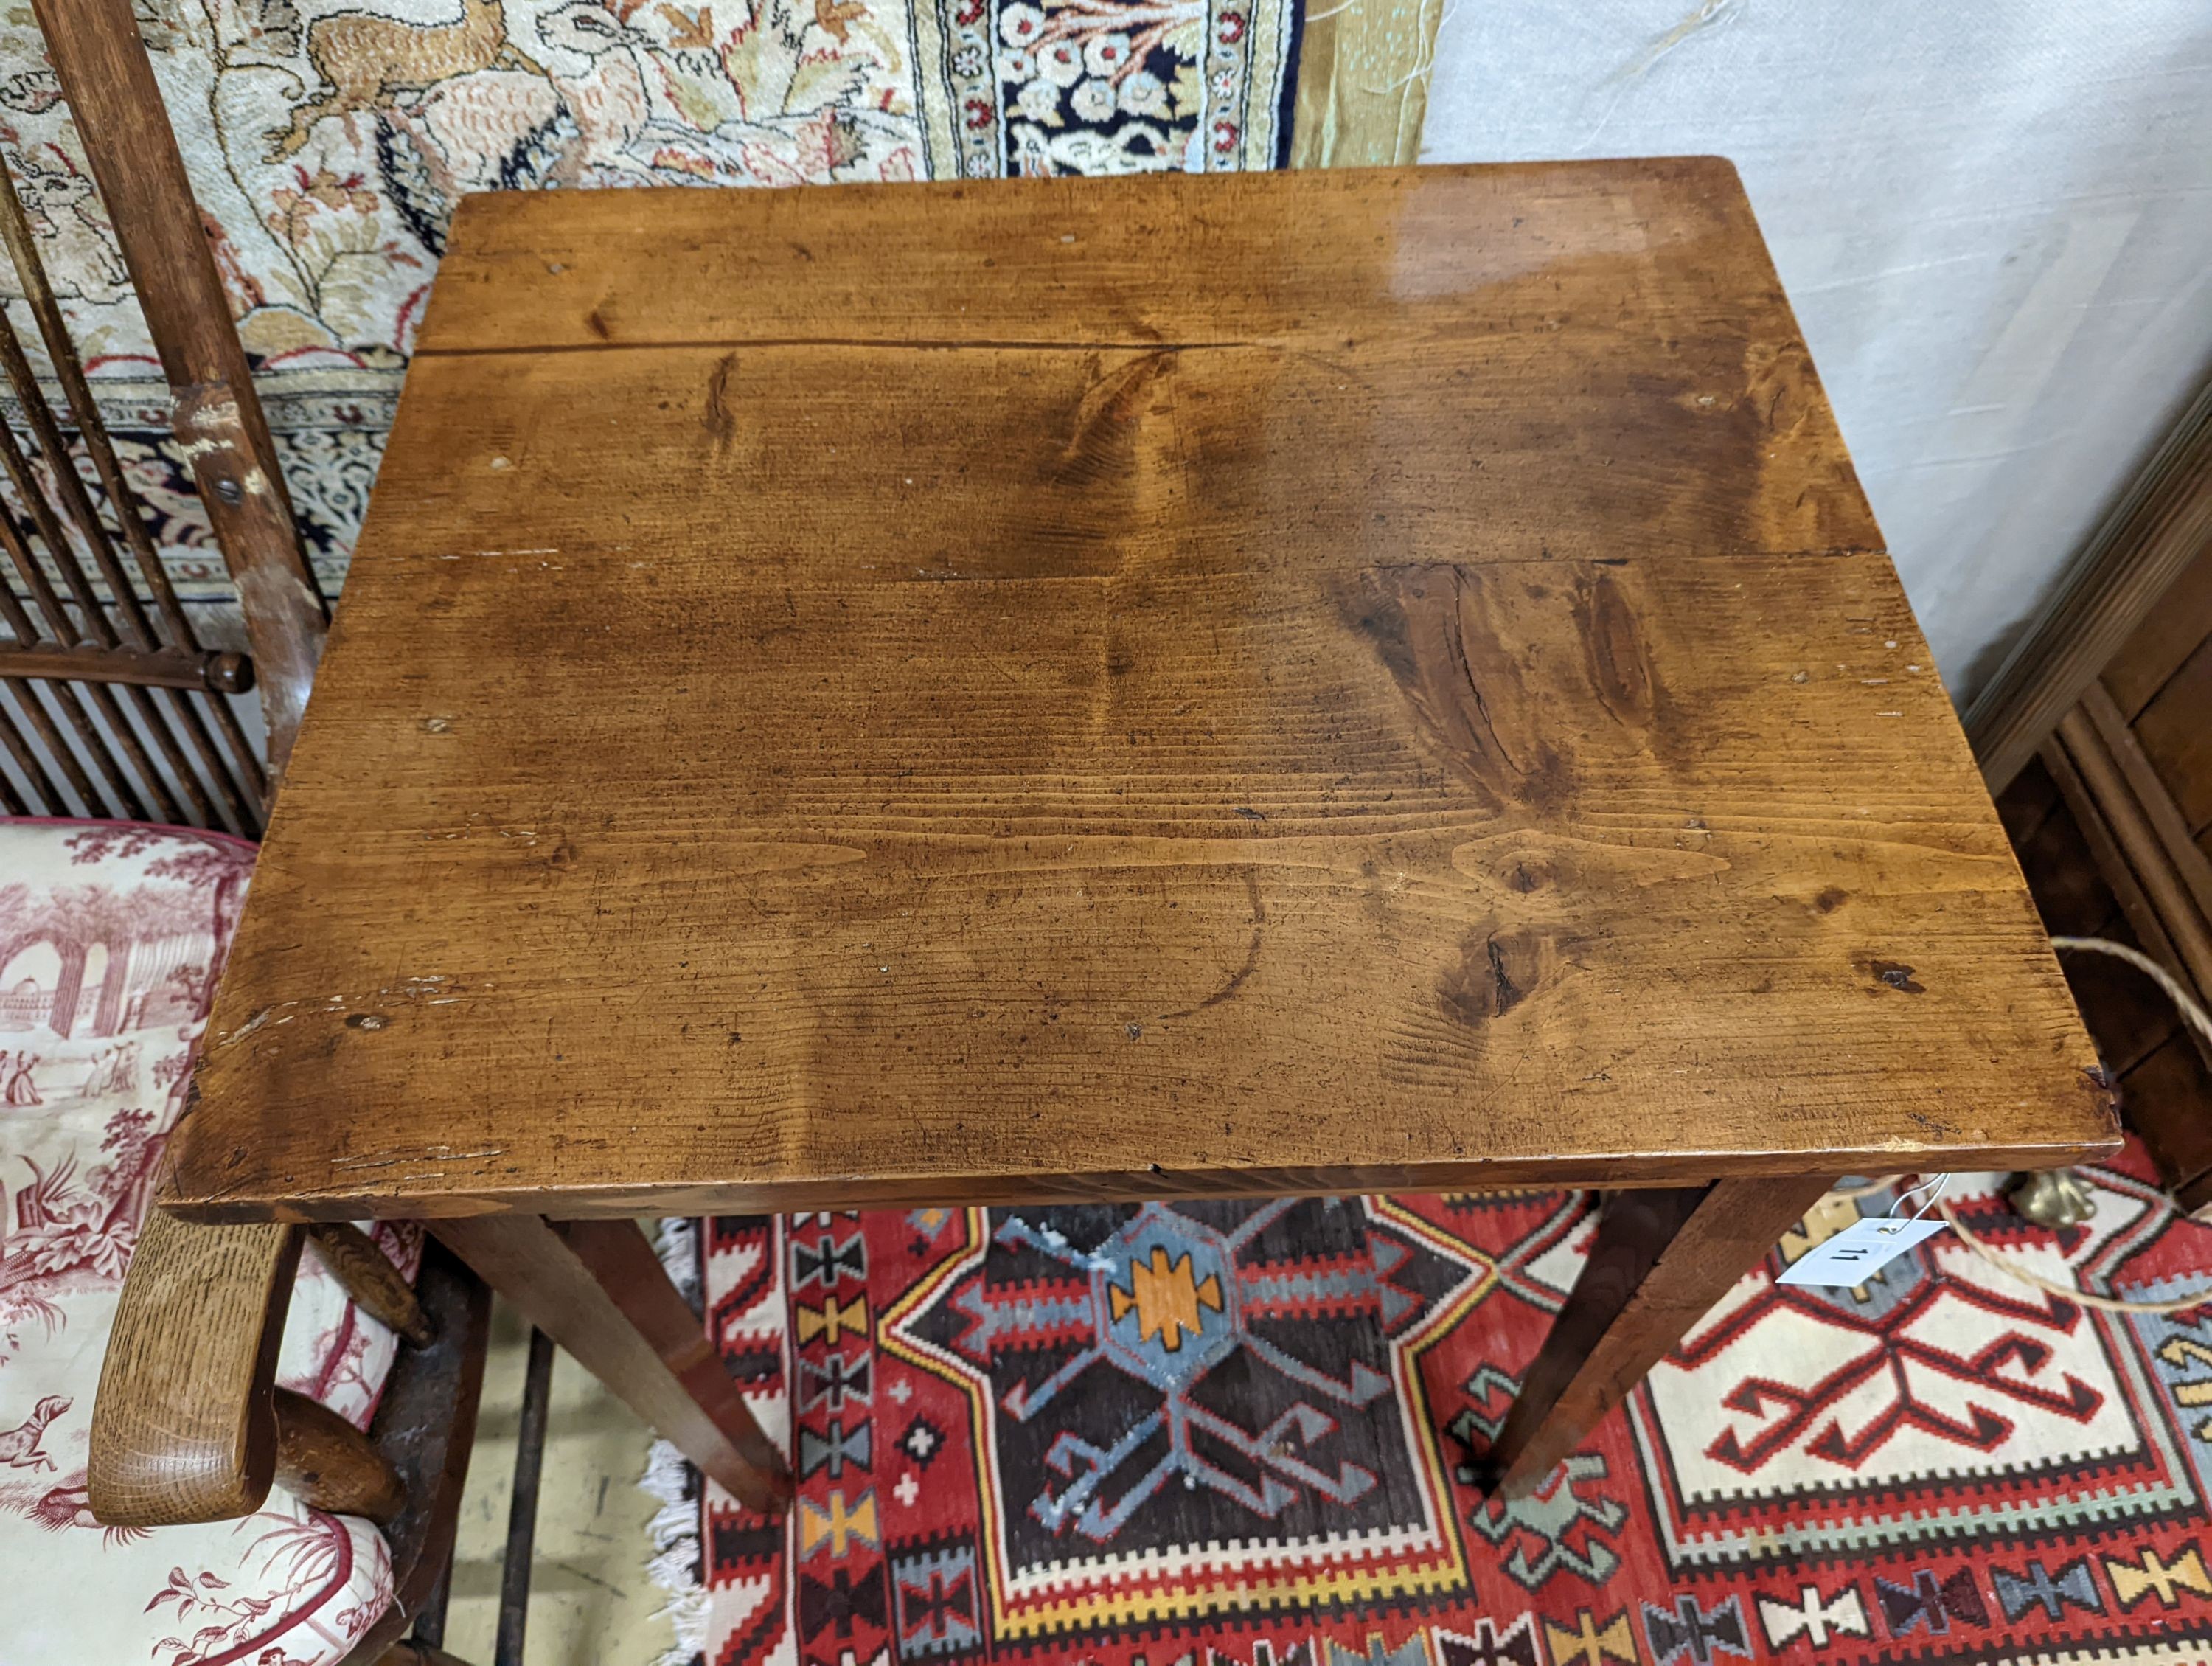 A French pine and oak side table, width 60cm, depth 50cm, height 72cm